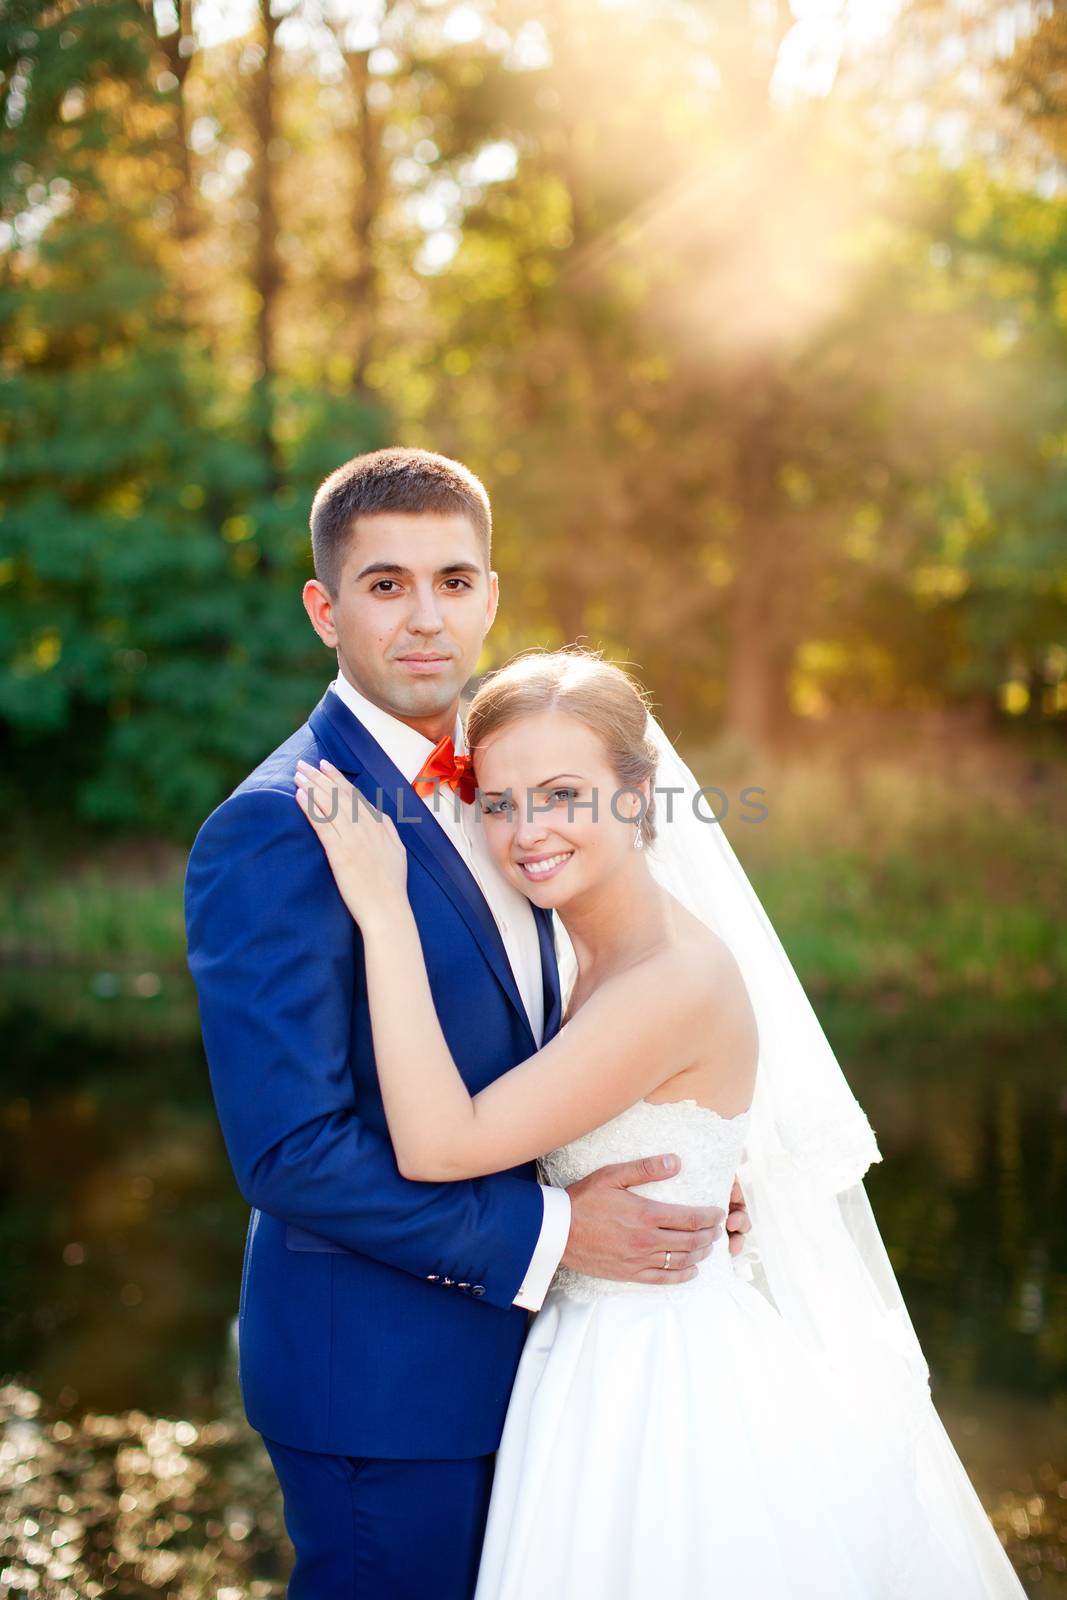 Funny bride and groom on a summer day in the park